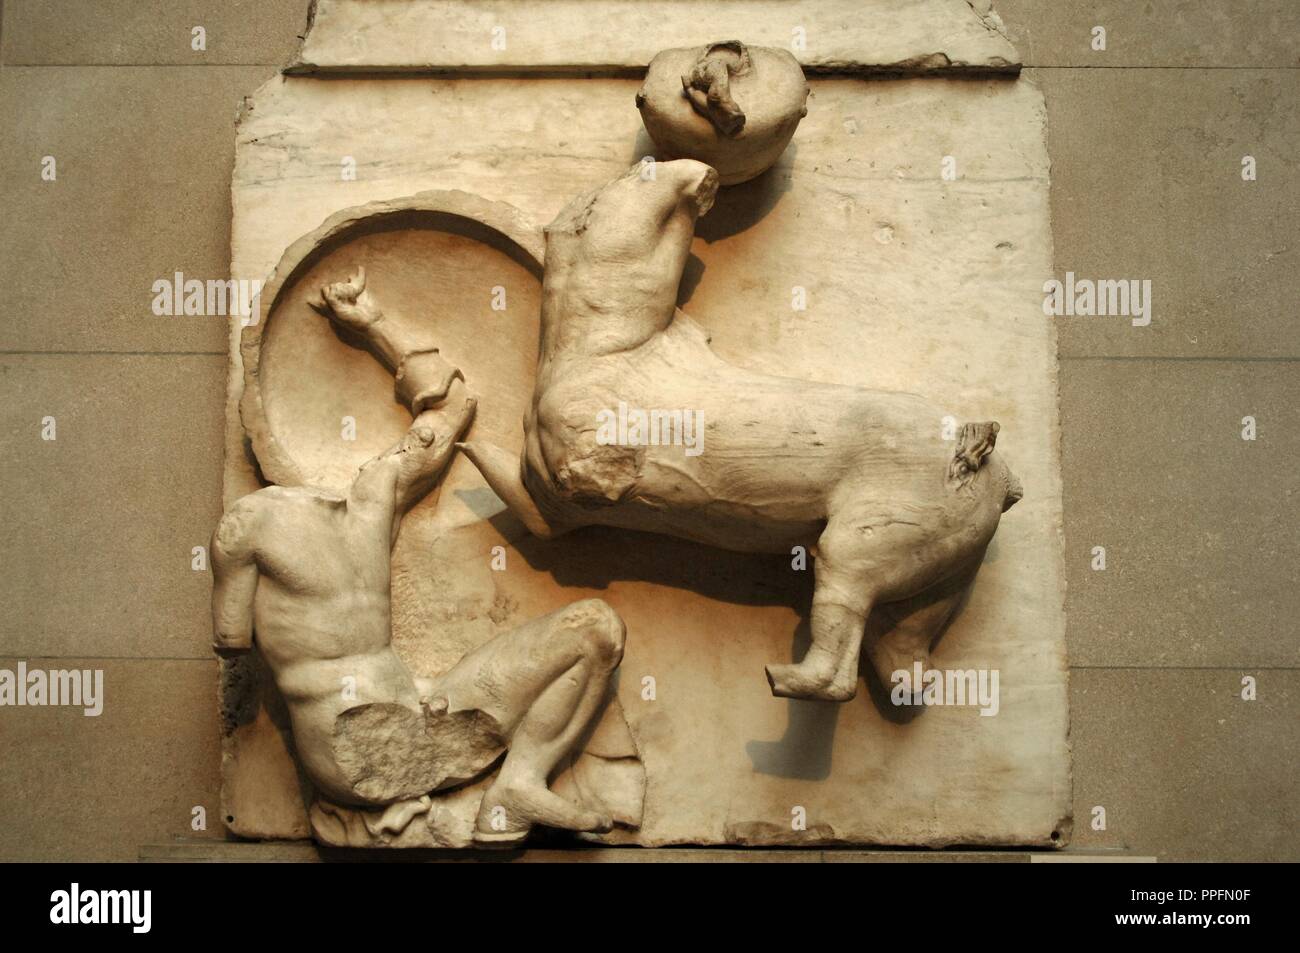 Metope IV from the Parthenon marbles depicting part of the battle between the Centaurs and the Lapiths. 5th century BC. Athens. British Museum. London. United Kingdom. Stock Photo